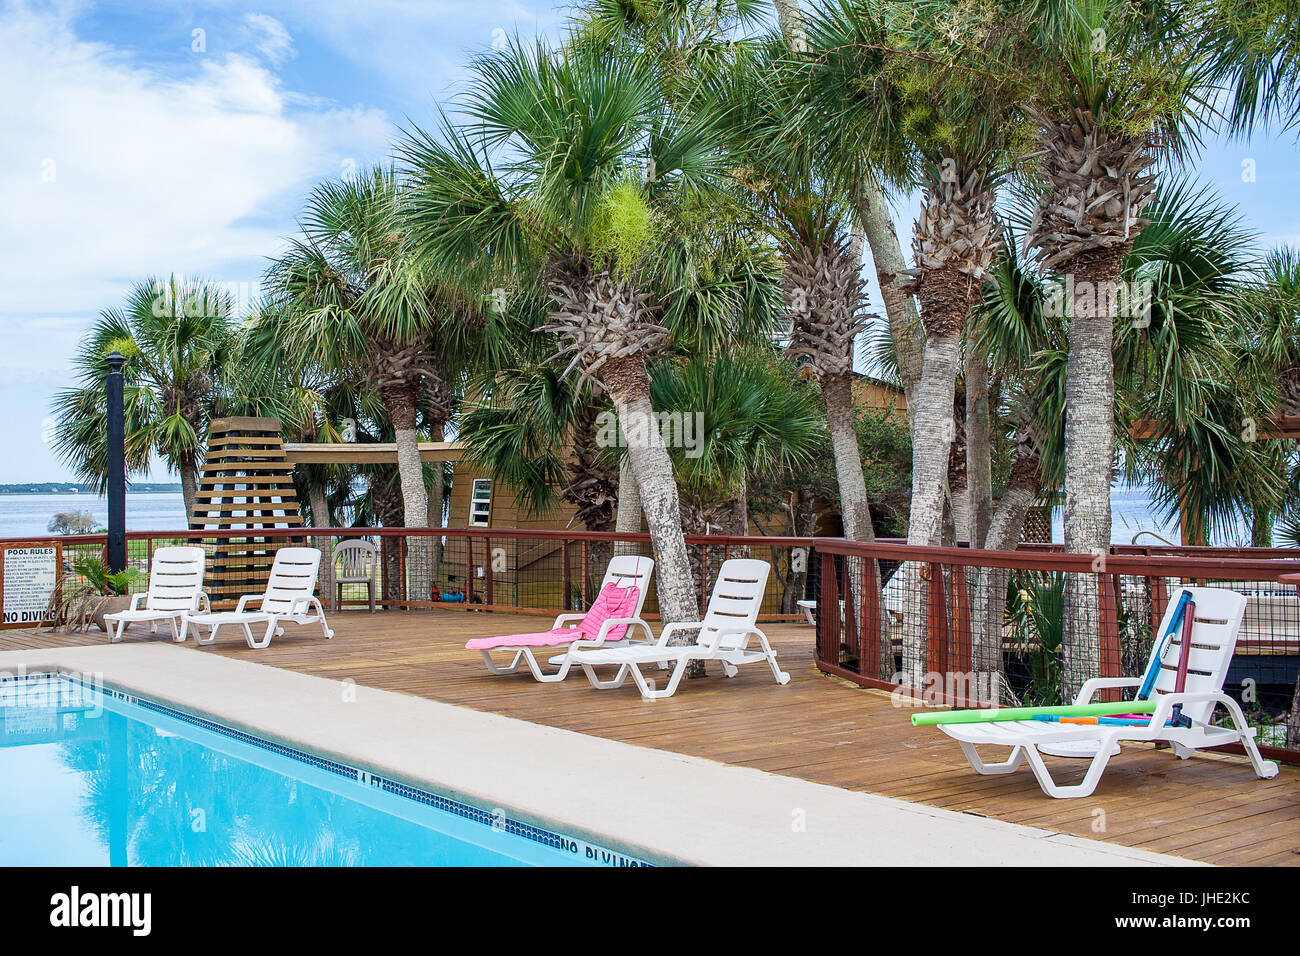 A pool side with lounge chairs and palm trees in the background. Stock Photo